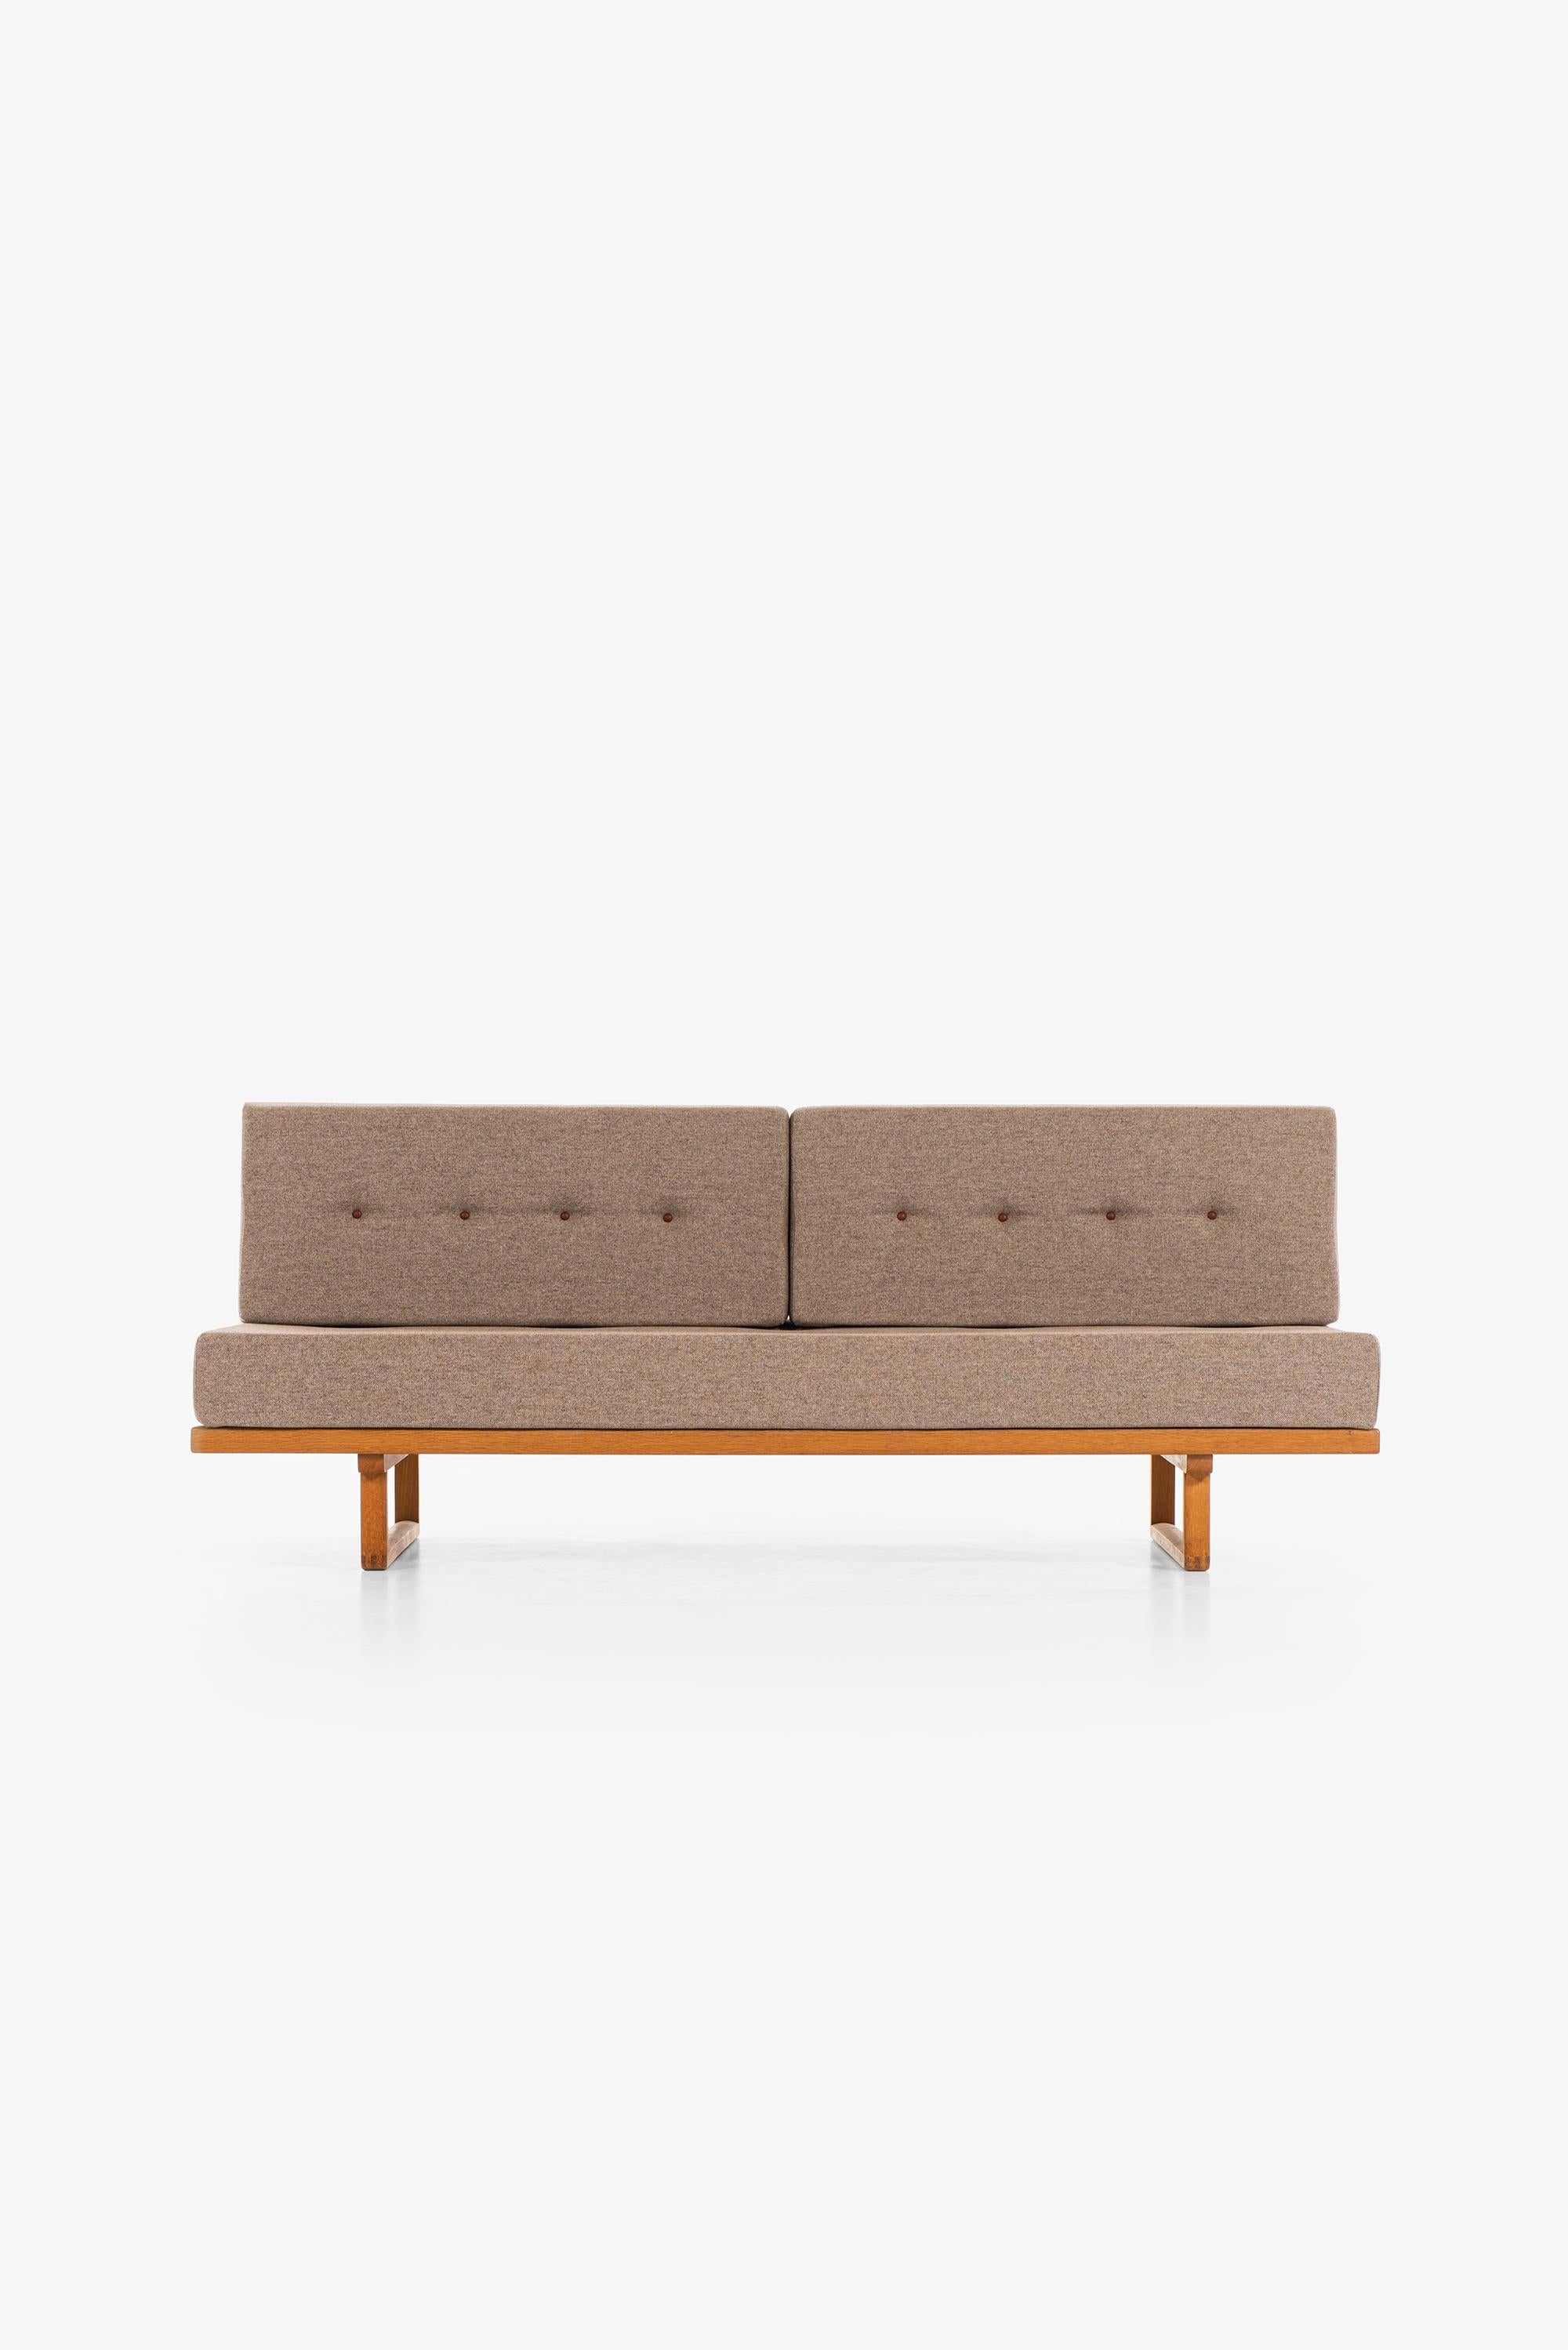 Rare sofa / daybed model 4311/4312 designed by Børge Mogensen. Produced by Fredericia stolefabrik in Denmark.